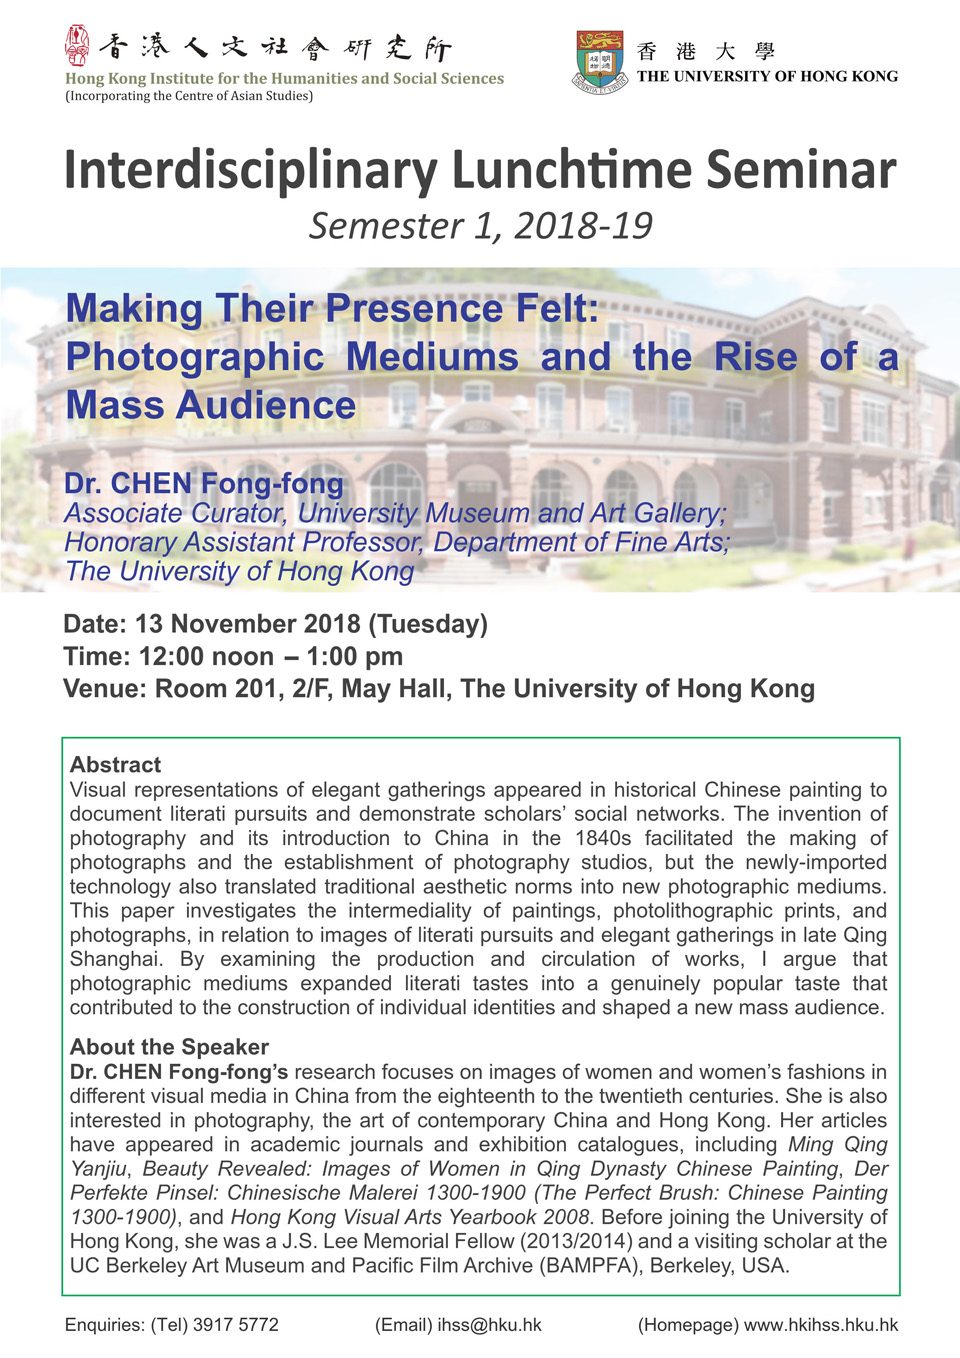 An Interdisciplinary Lunchtime Seminar on “ Making Their Presence Felt: Photographic Mediums and the Rise of a Mass Audience” by Dr. Chen Fong Fong (November 13, 2018)